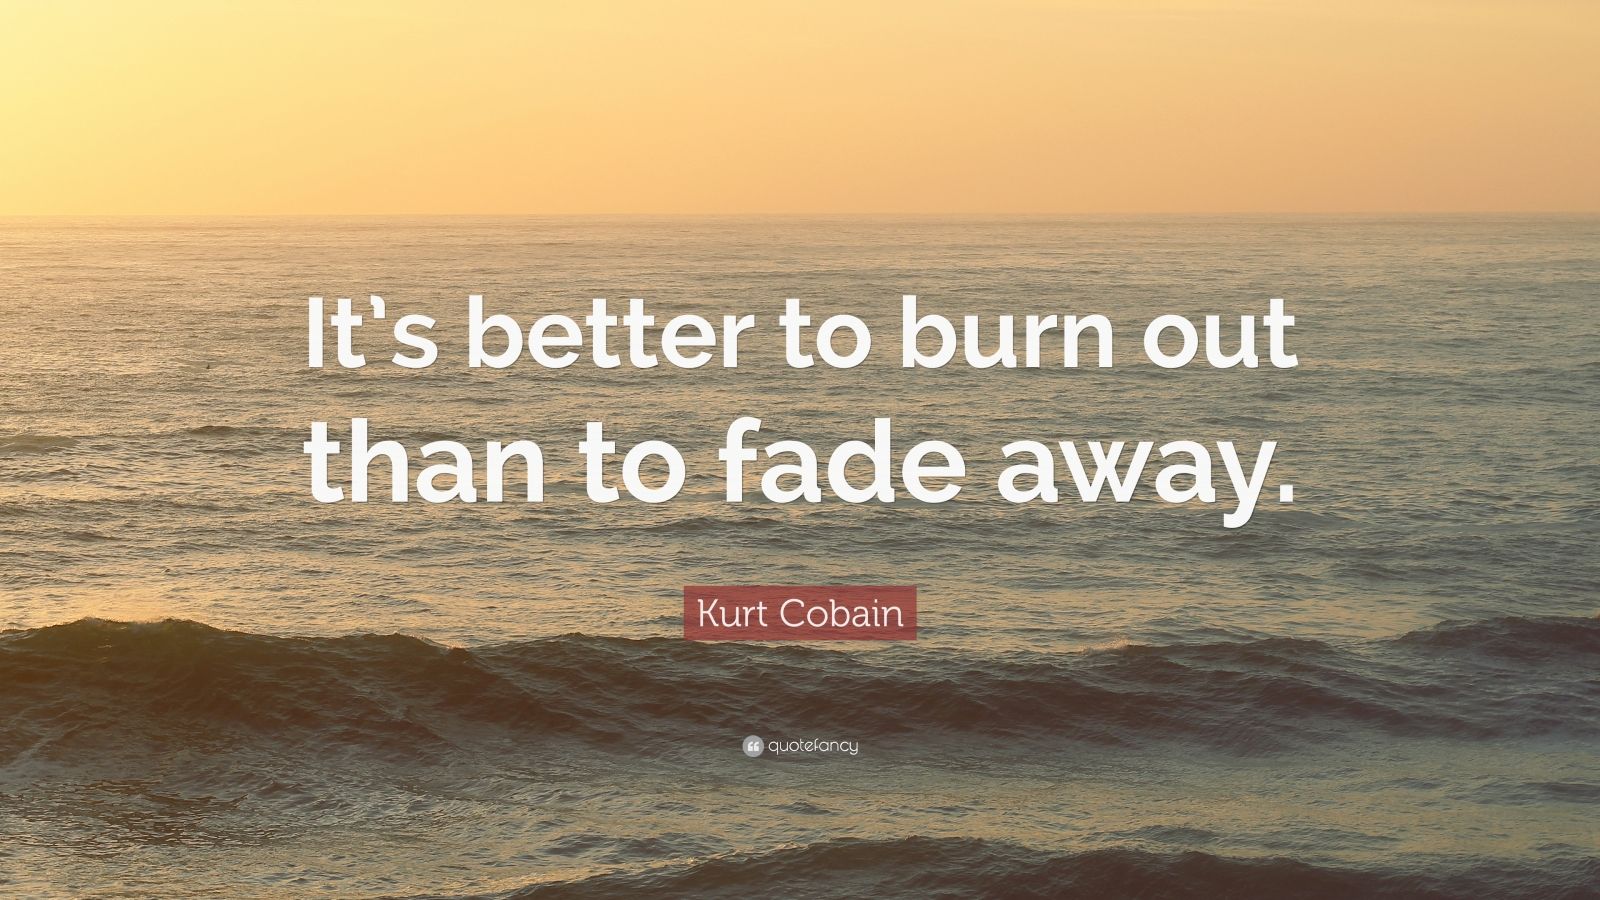 Kurt Cobain Quote: "It's better to burn out than to fade away." (16 wallpapers) - Quotefancy